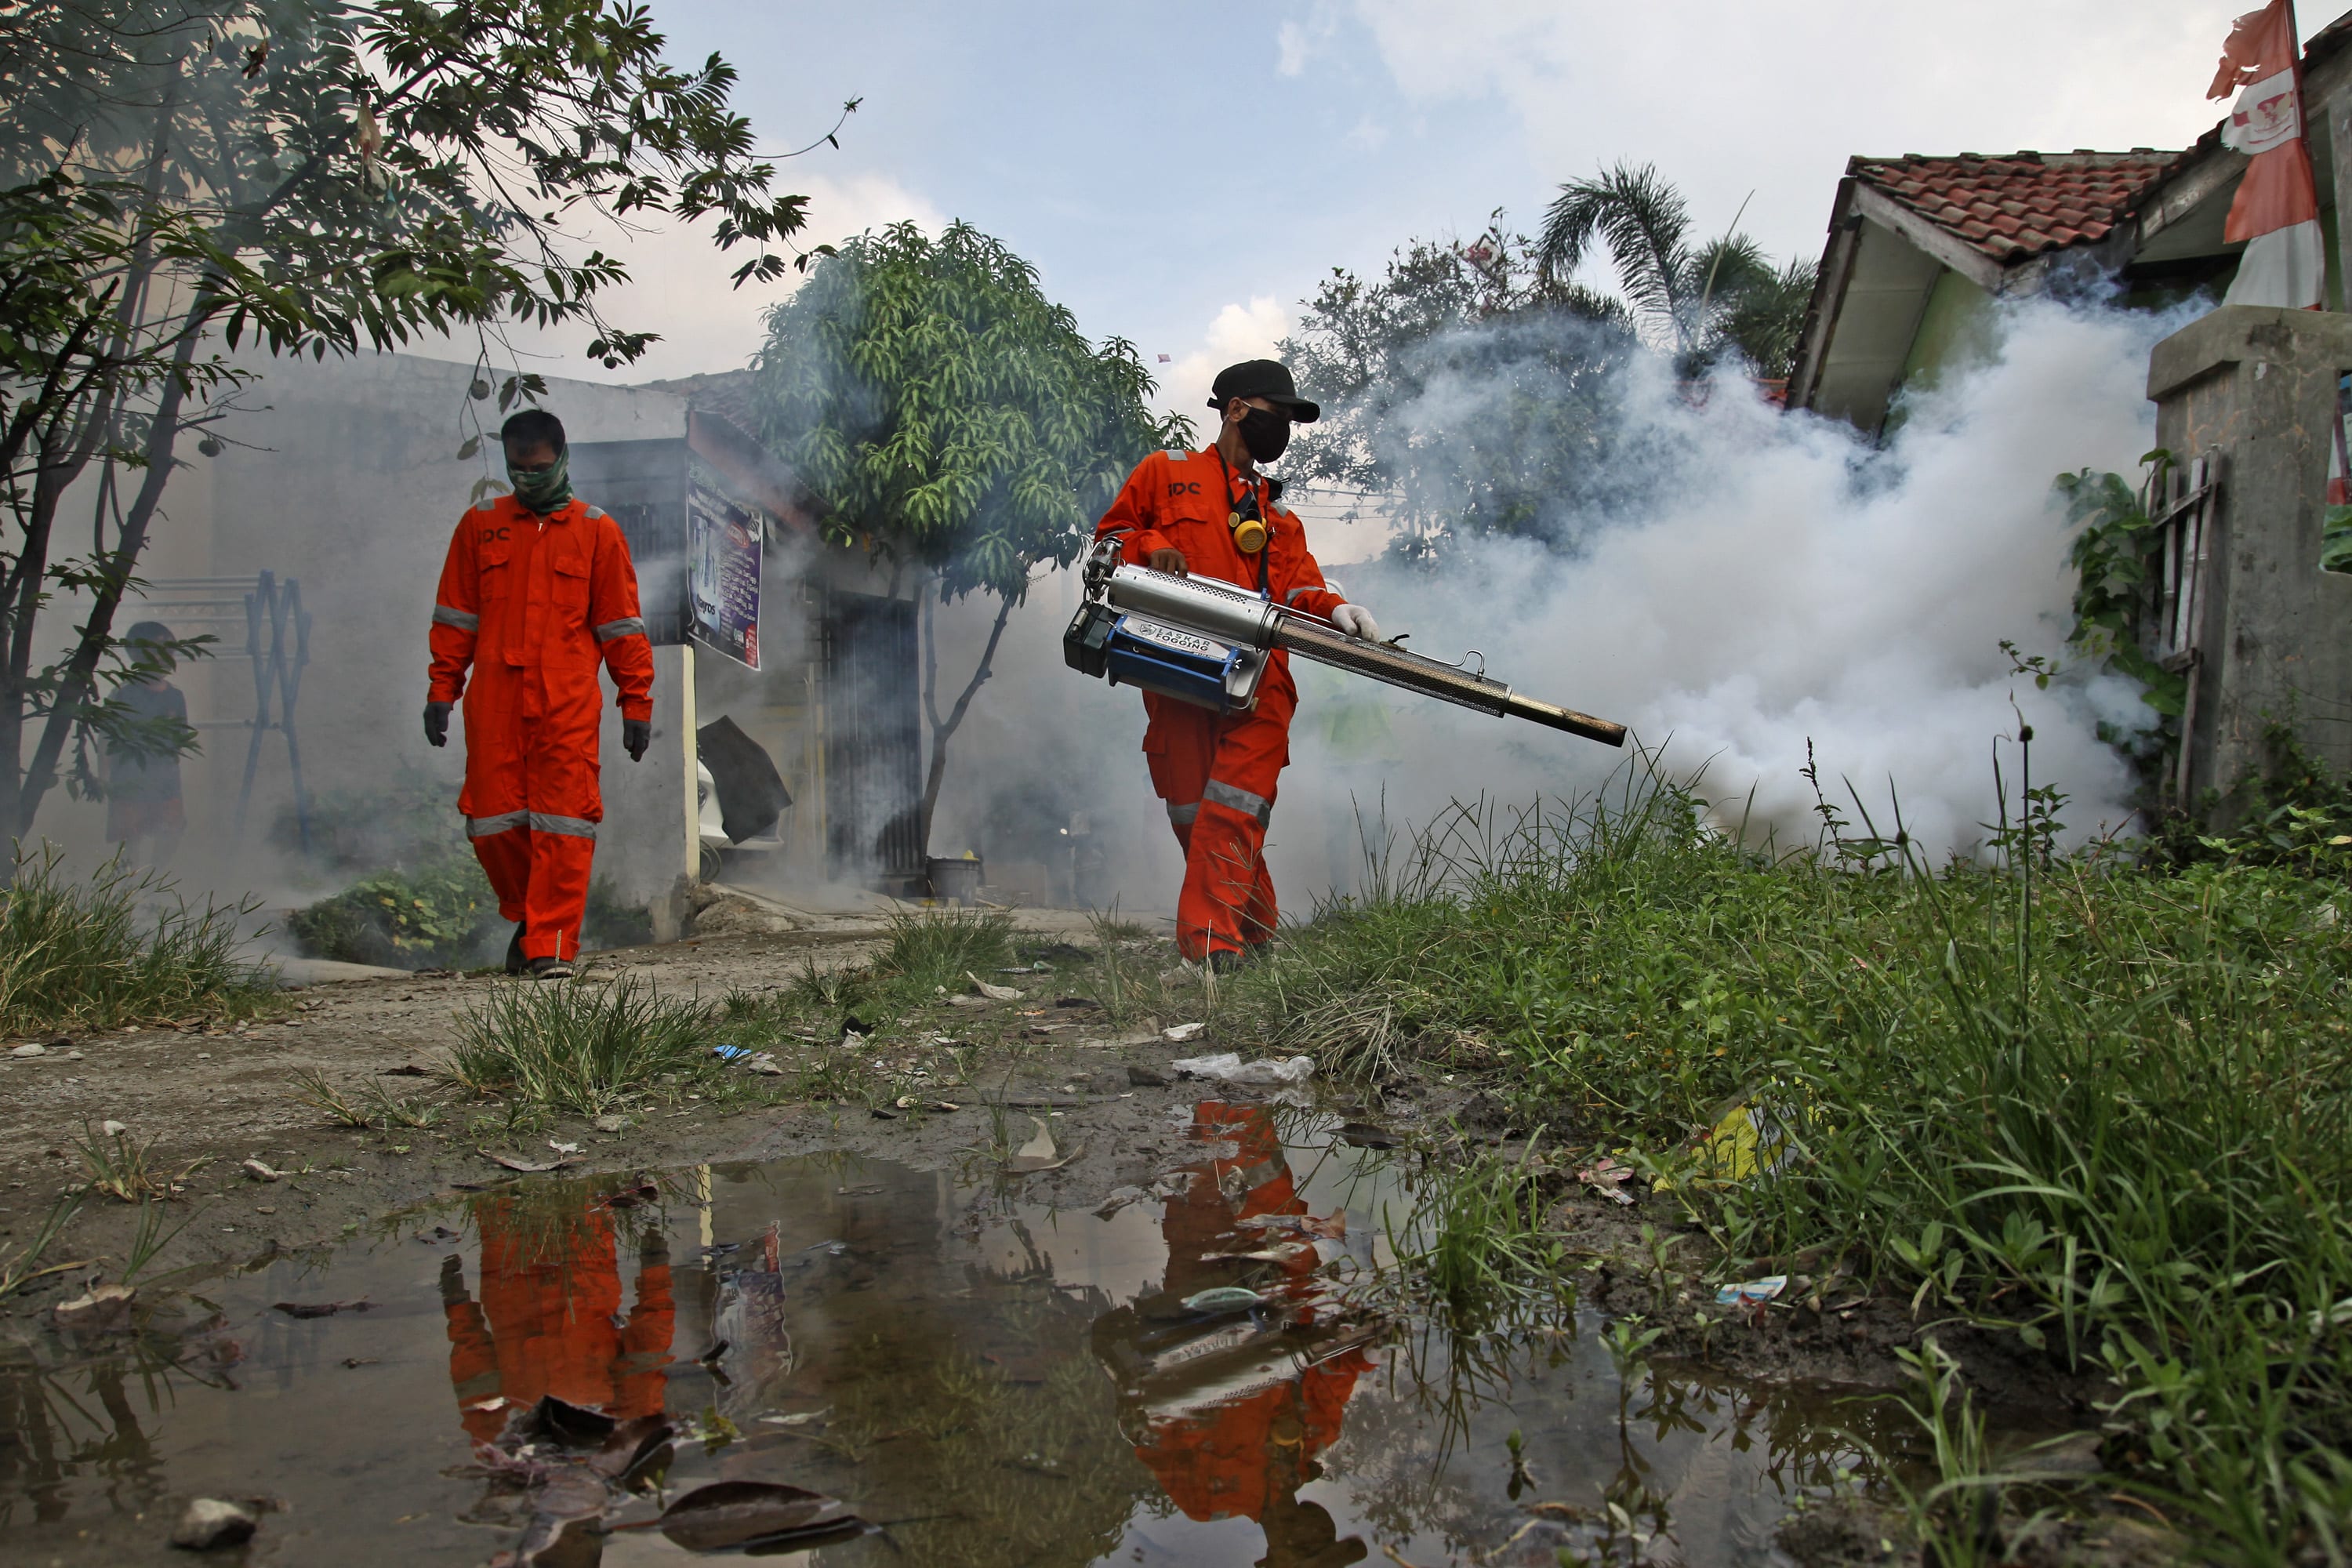 Outbreak of dengue fever in Southeast Asia is 'exploding' amid the coronavirus fight